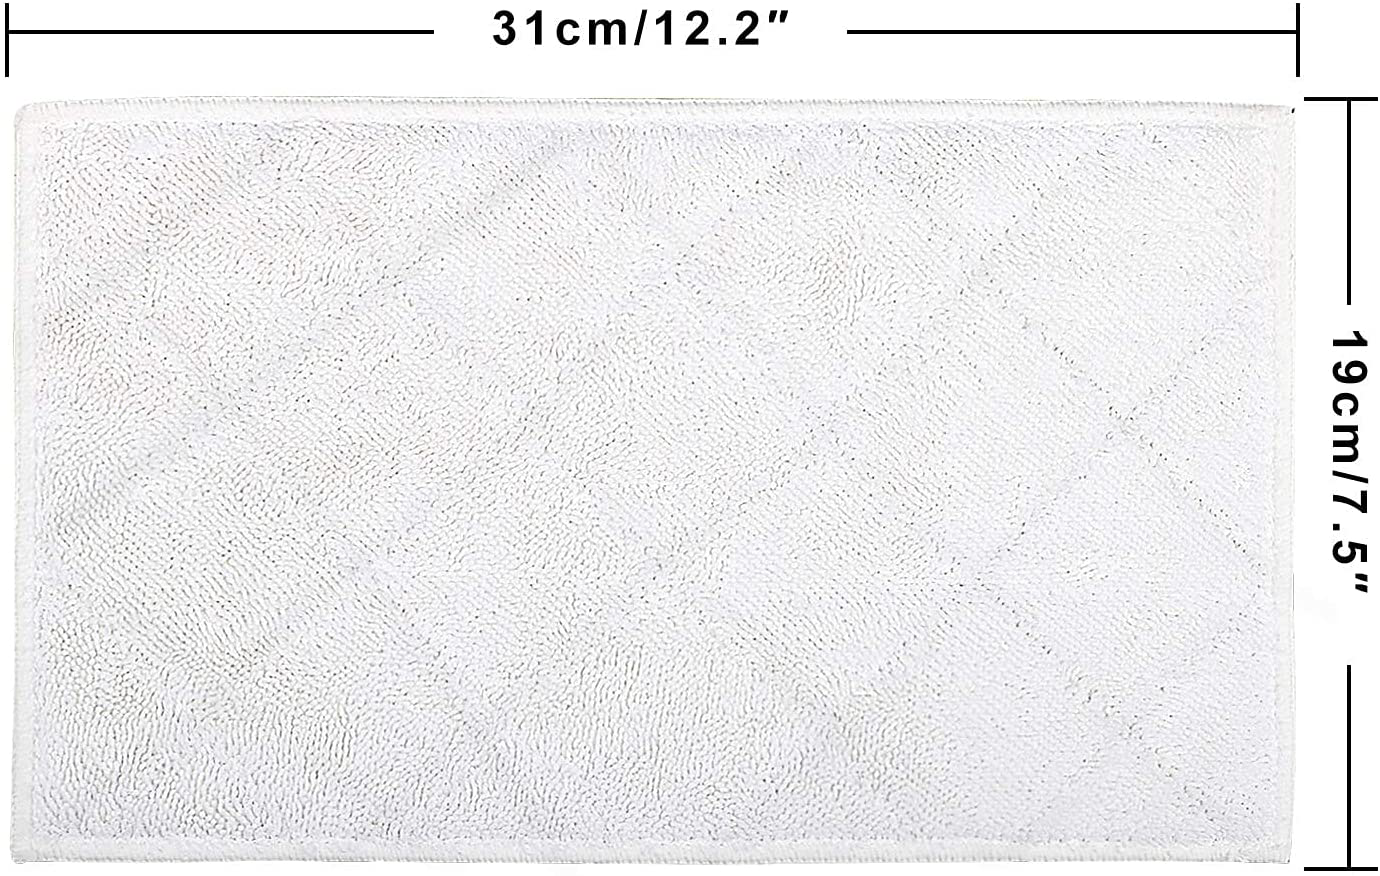 VCLENA Cleaning Mop pad Replacement Pads for Light N Easy S301 S3601 S3101 S7326 7688ANB 7688ANW 7618ANB 7618ANW Floor Steam Cleaner 7 Pack